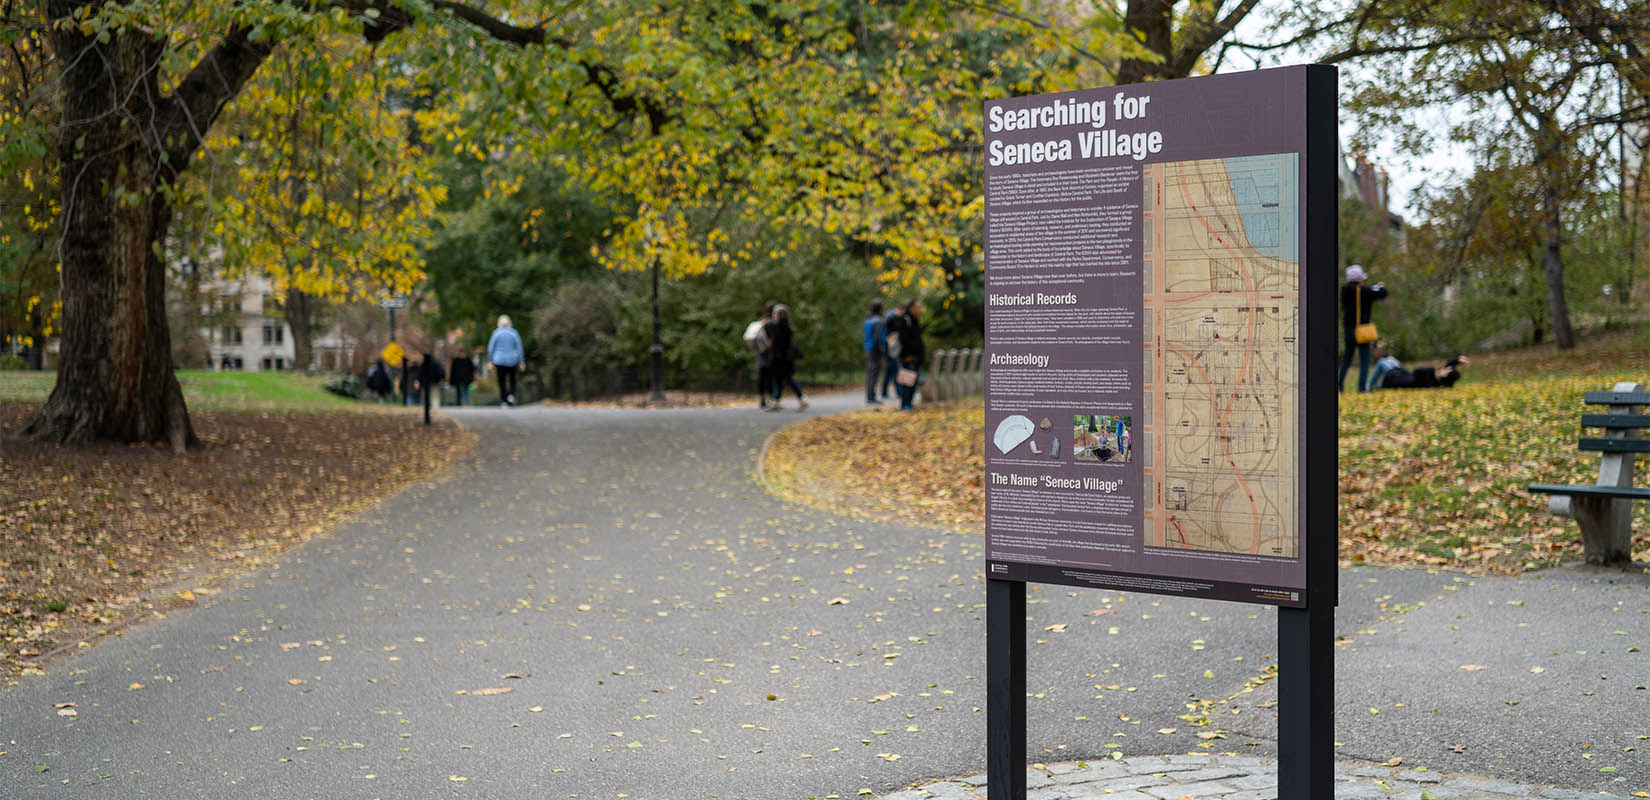 An interpretive sign at the Seneca Village site in Central Park that explores the area's Black history